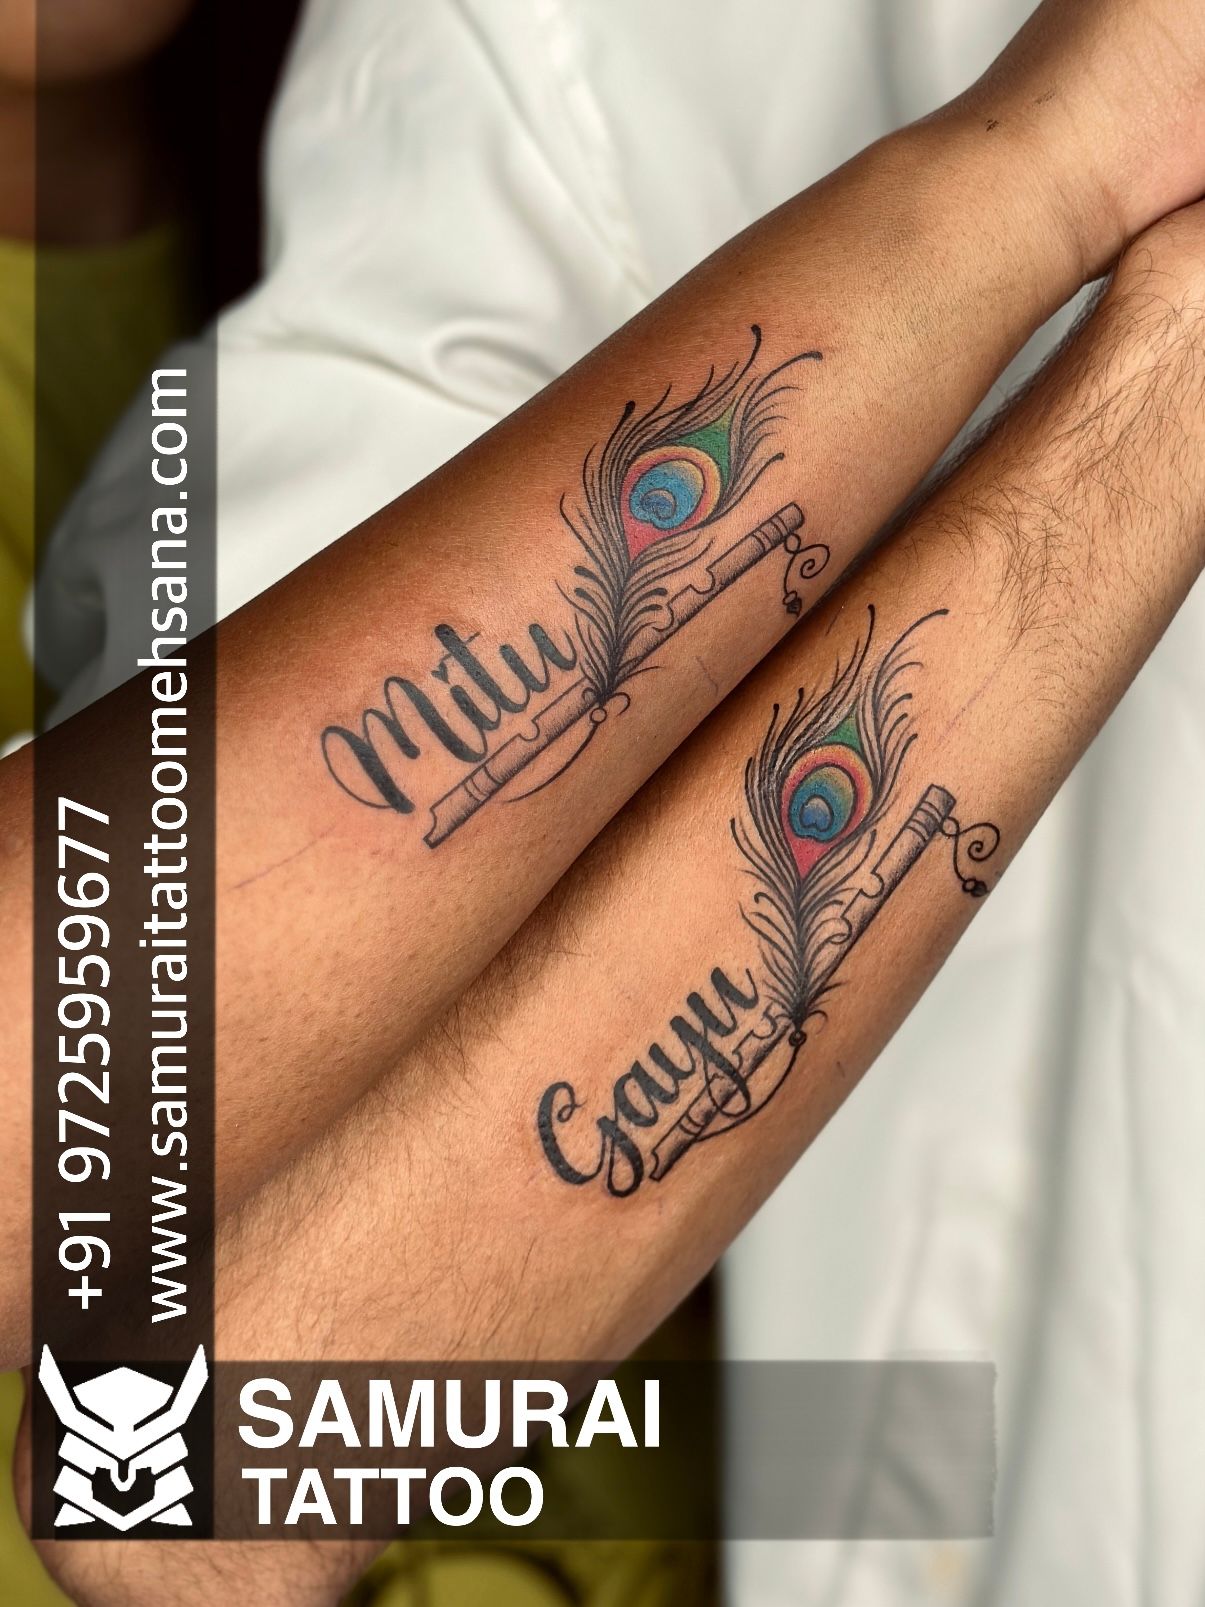 60+ Best Matching And Unique Tattoos For Couples | Couples tattoo designs,  Matching couple tattoos, Couple tattoos unique